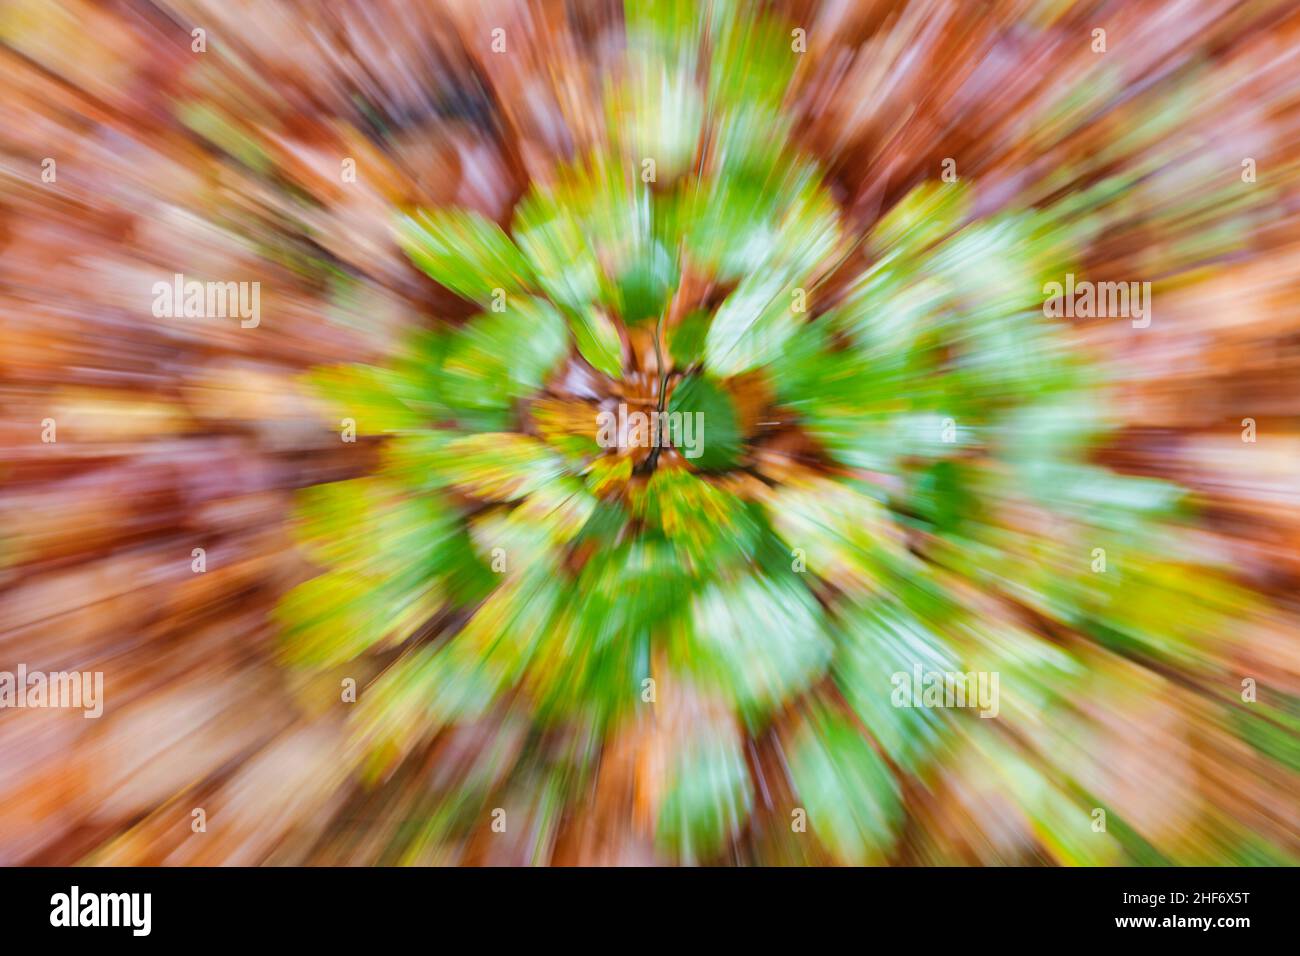 abstract image,  abstract autumn colors,  beech leaves Stock Photo